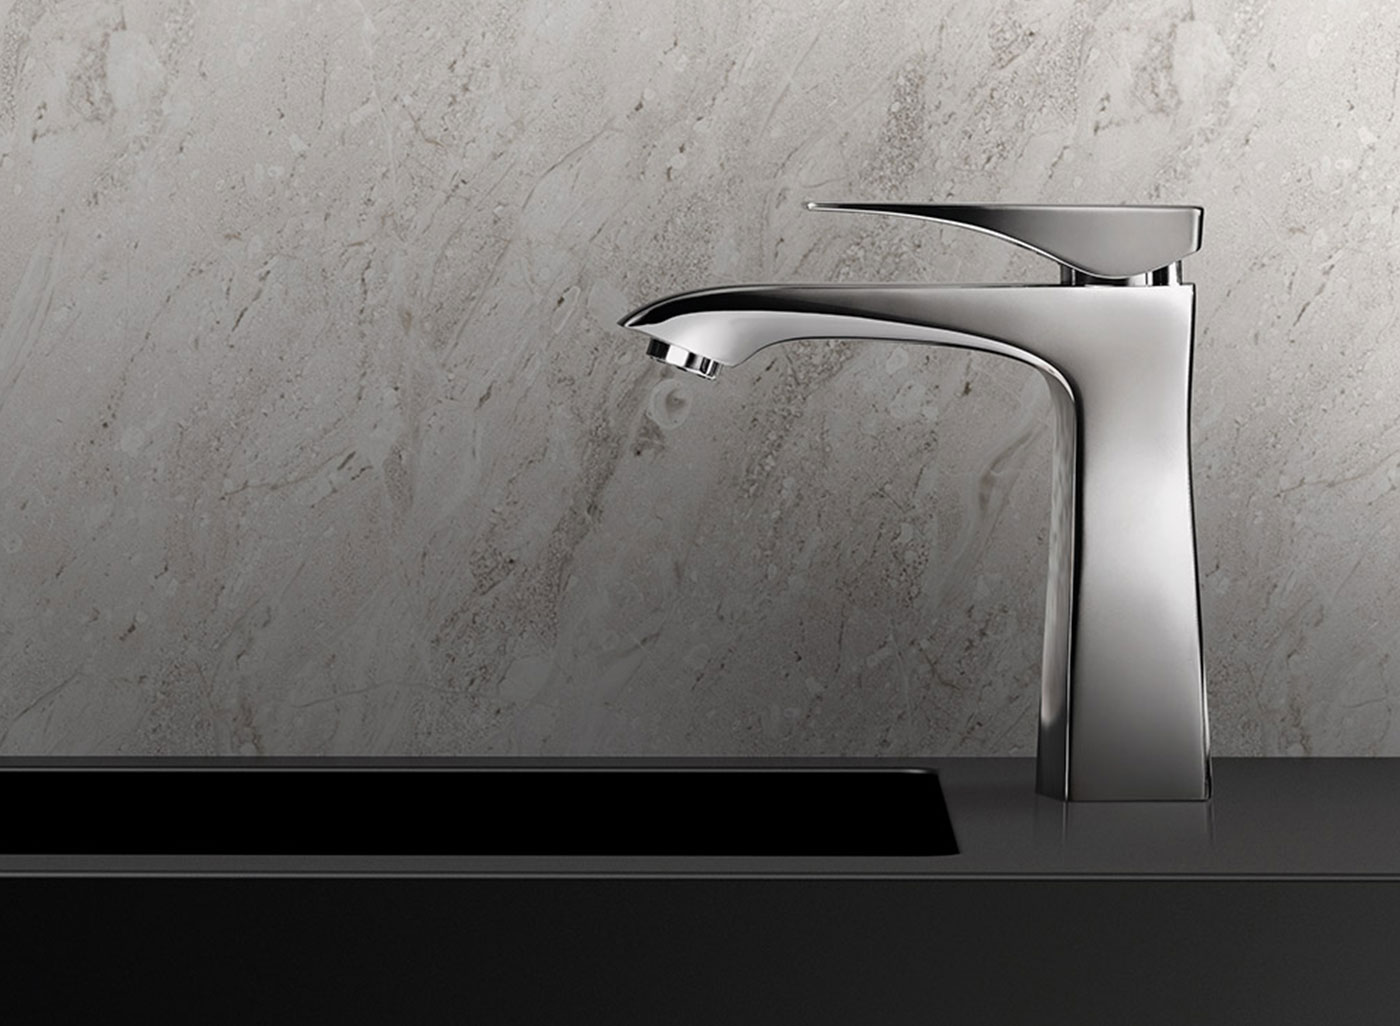 awarding your bathroom and kitchen with sophistication and timelessness.